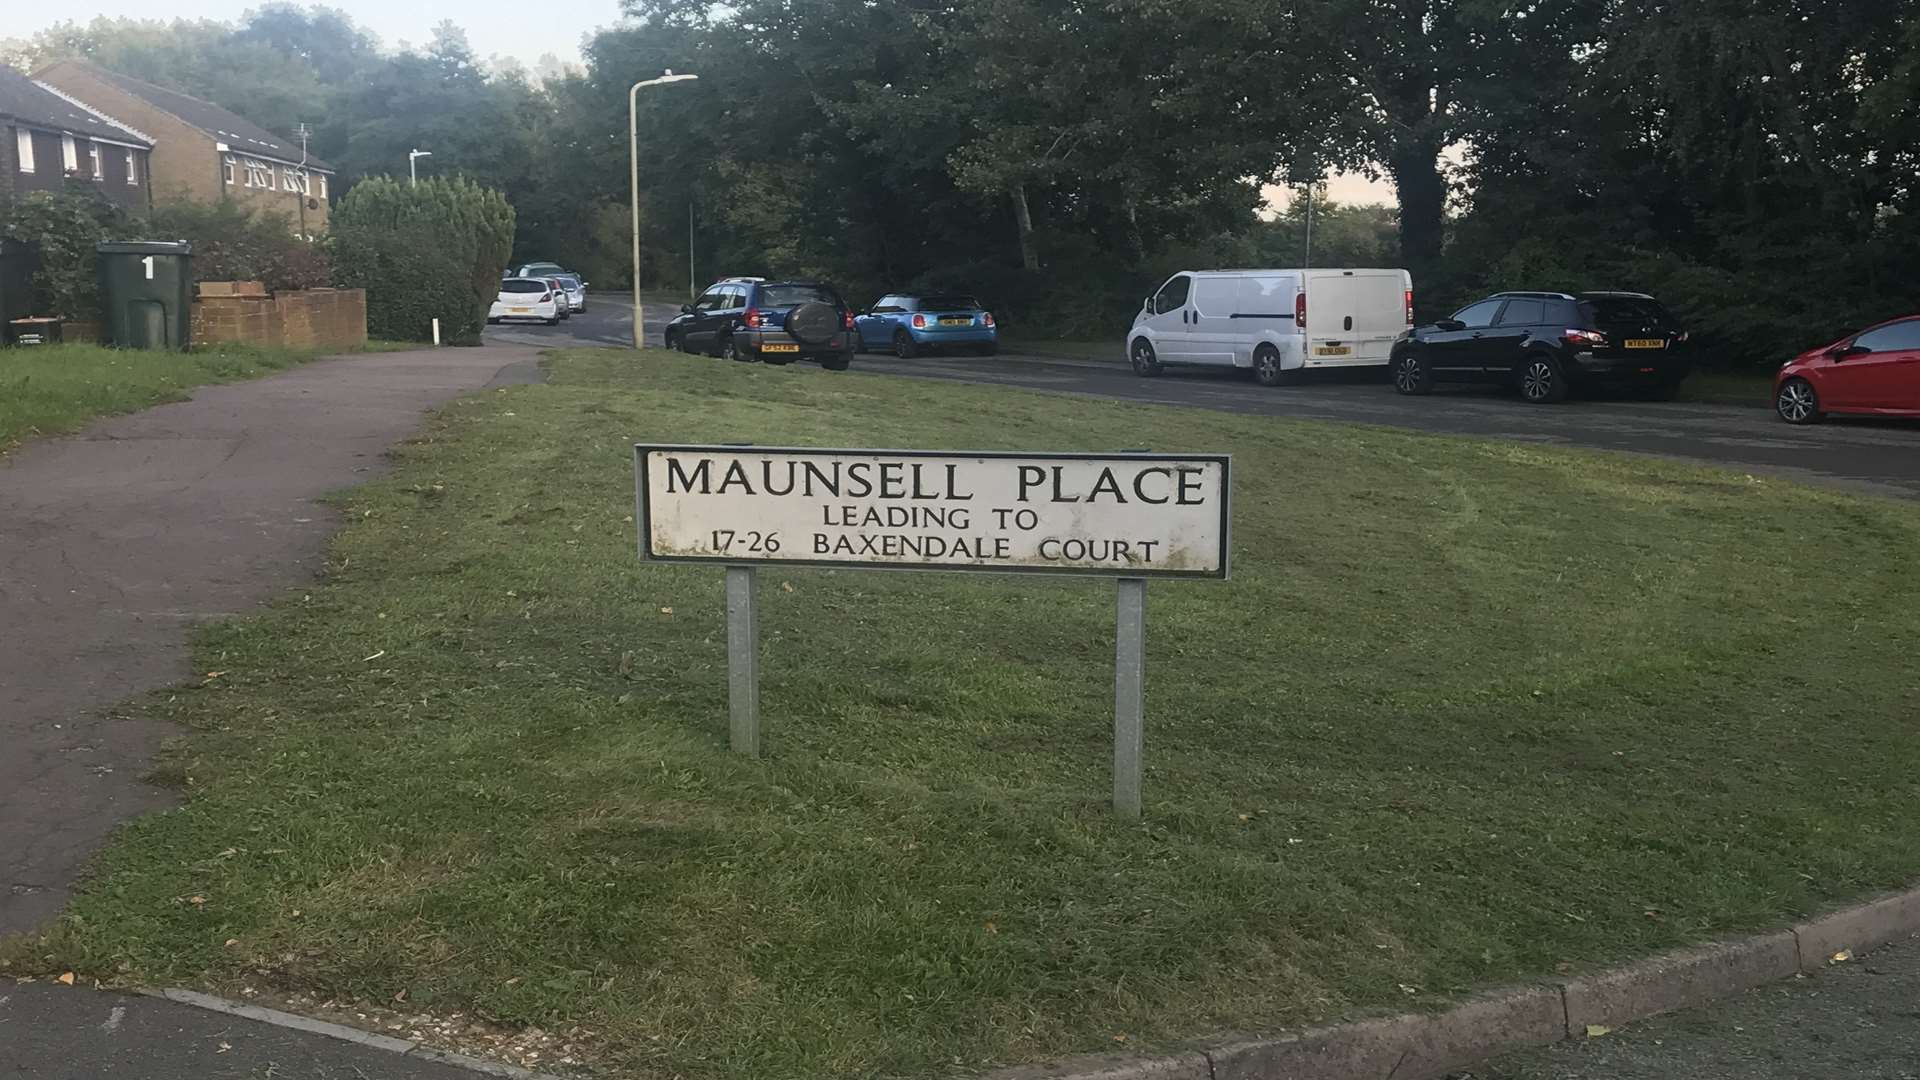 A new parking scheme is going ahead in Maunsell Place and Wainwright Place